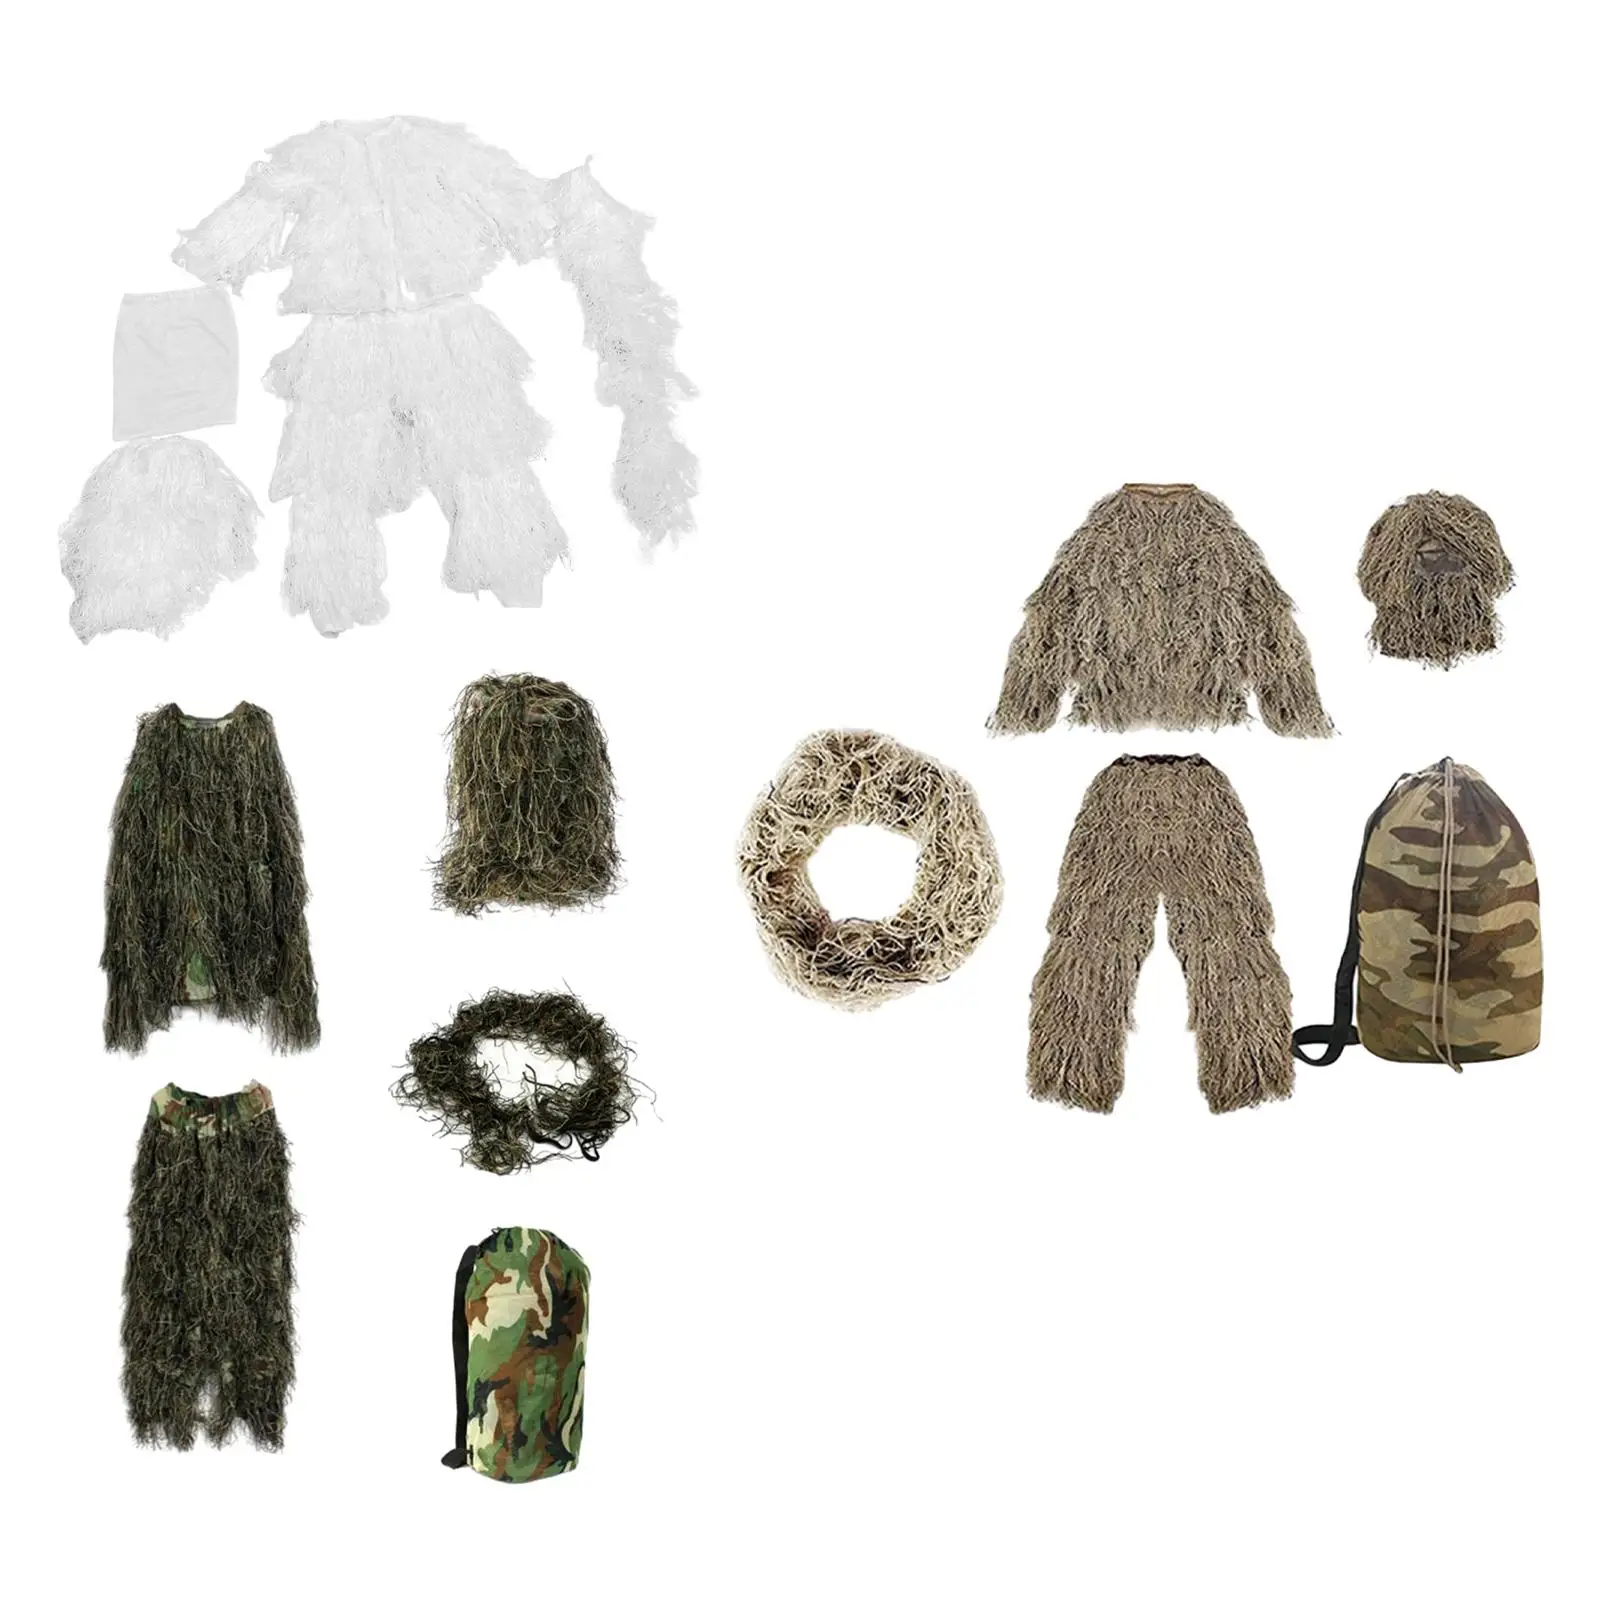 Children Ghillie Suit Fancy Dress Apparel Pants Disguise with Storage Bag Clothing for Party Game Hunting Outdoor Bird Watching